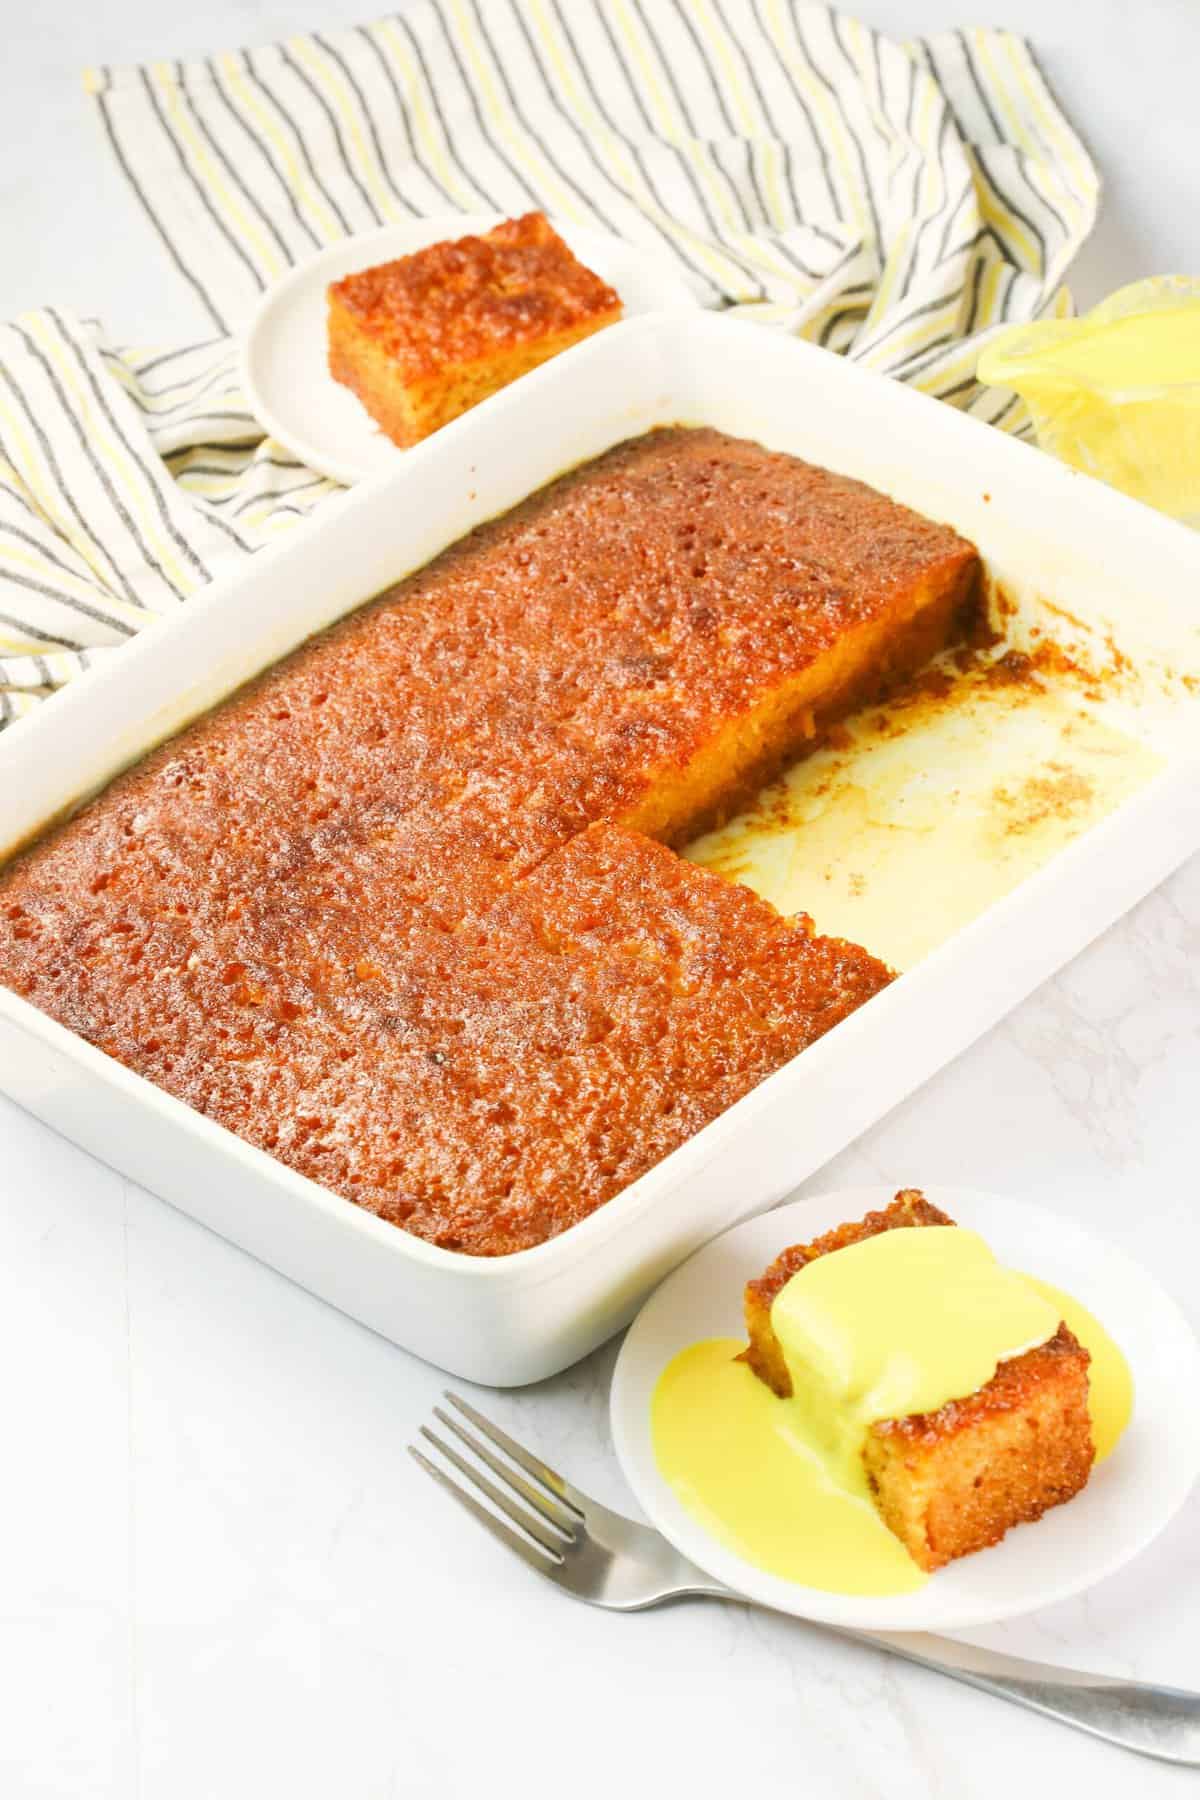 Serving up South African's iconic malva pudding